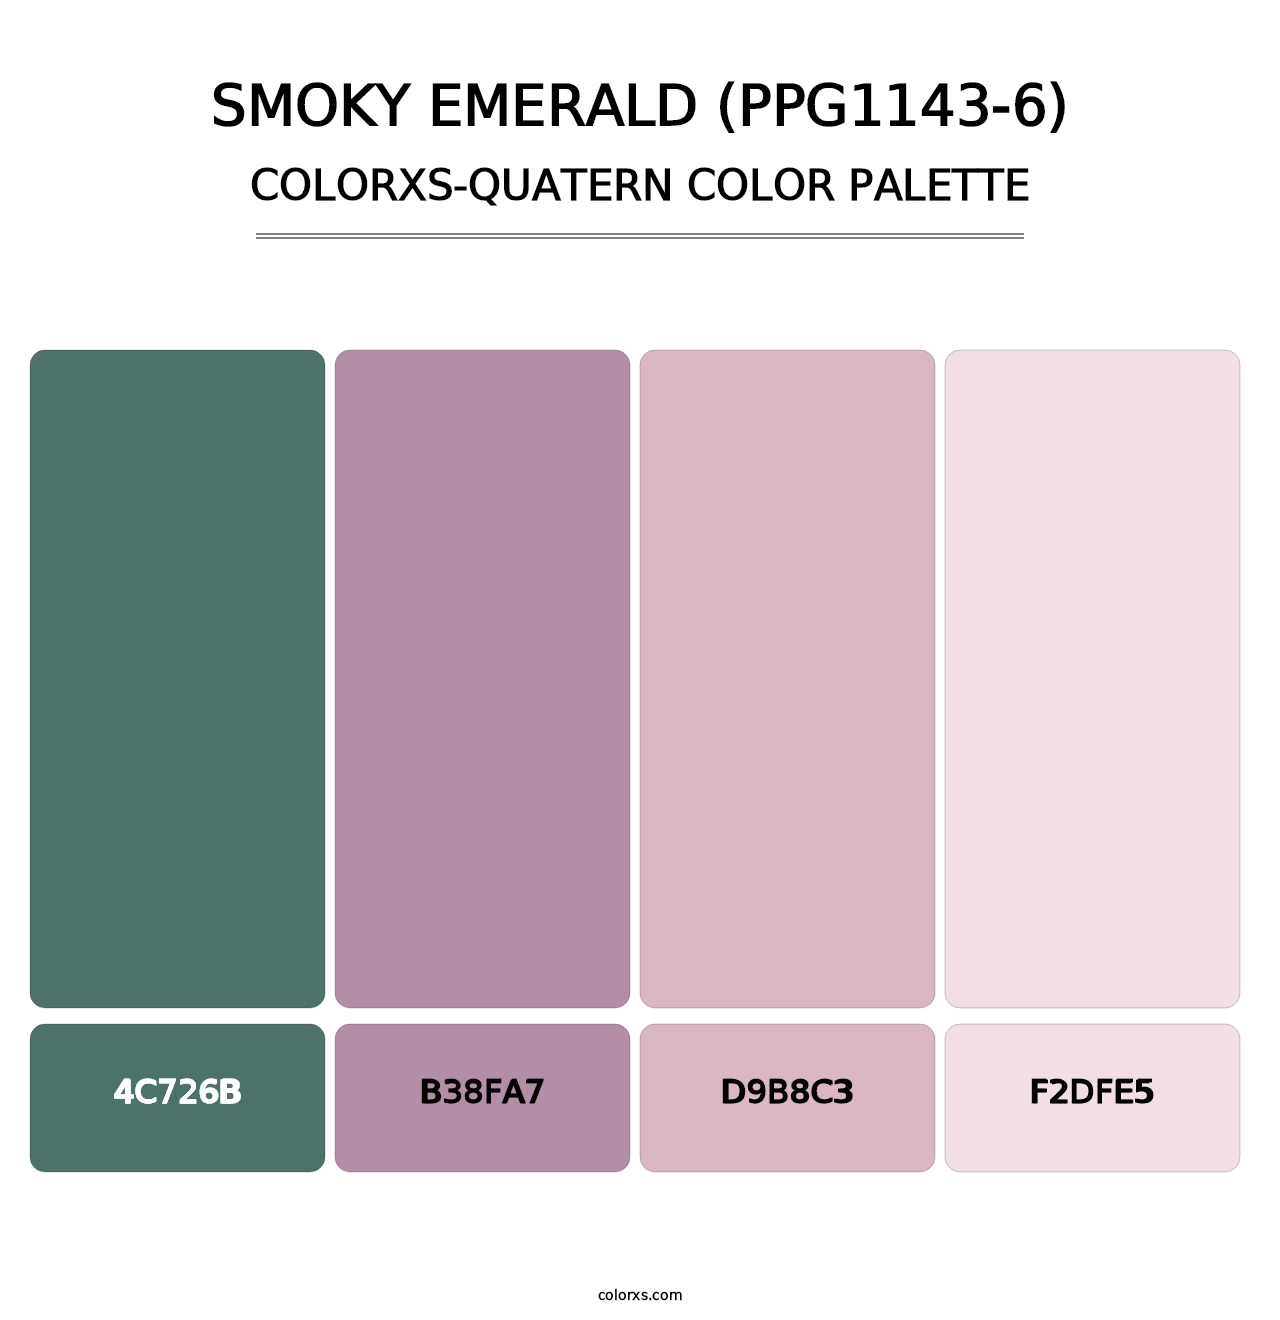 Smoky Emerald (PPG1143-6) - Colorxs Quatern Palette